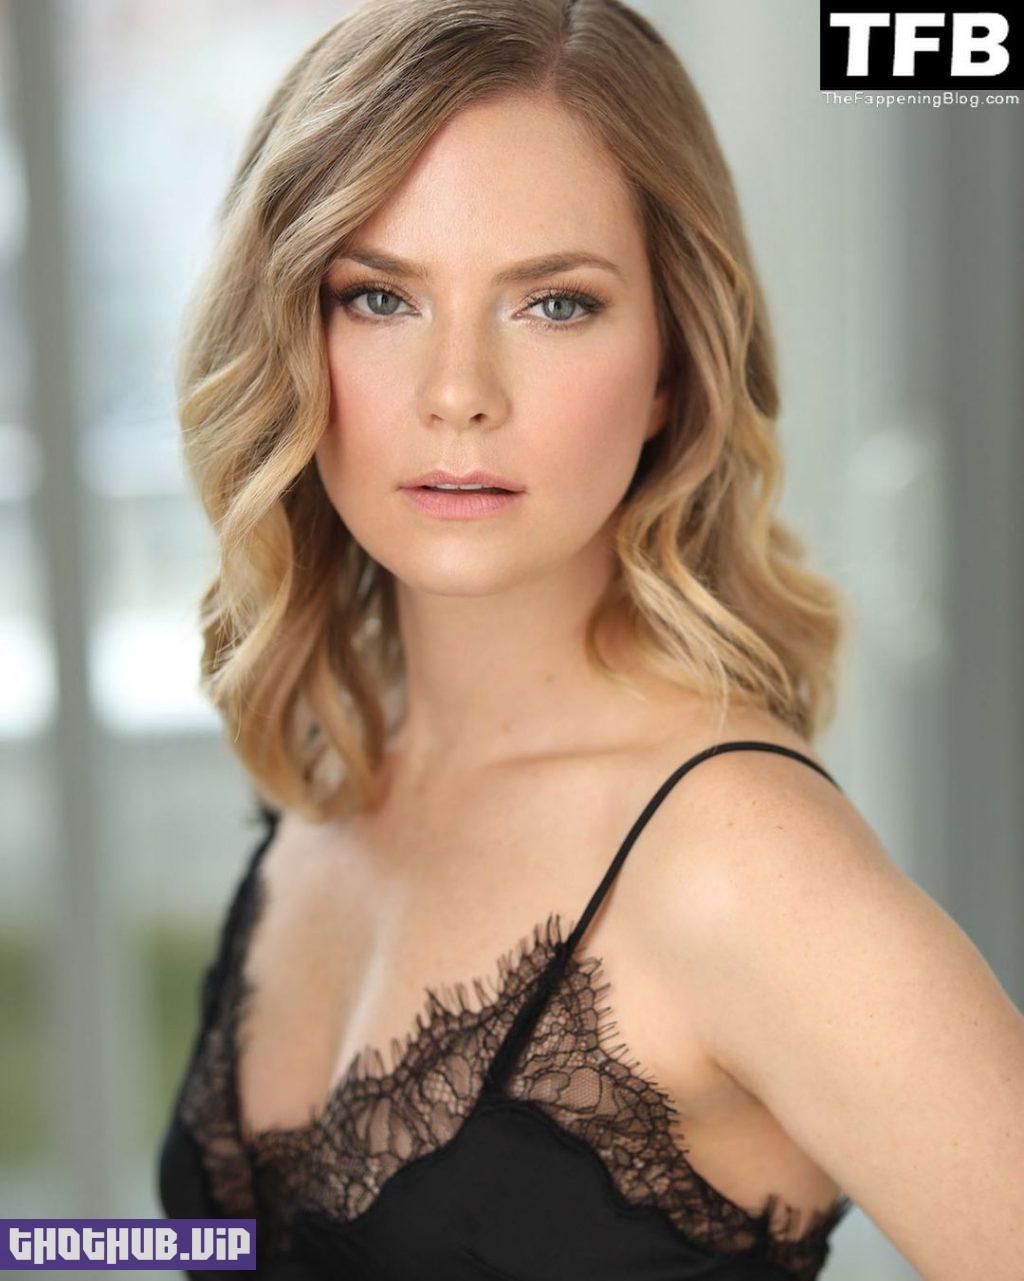 cindy busby sexy 241198 thefappeningblog.com